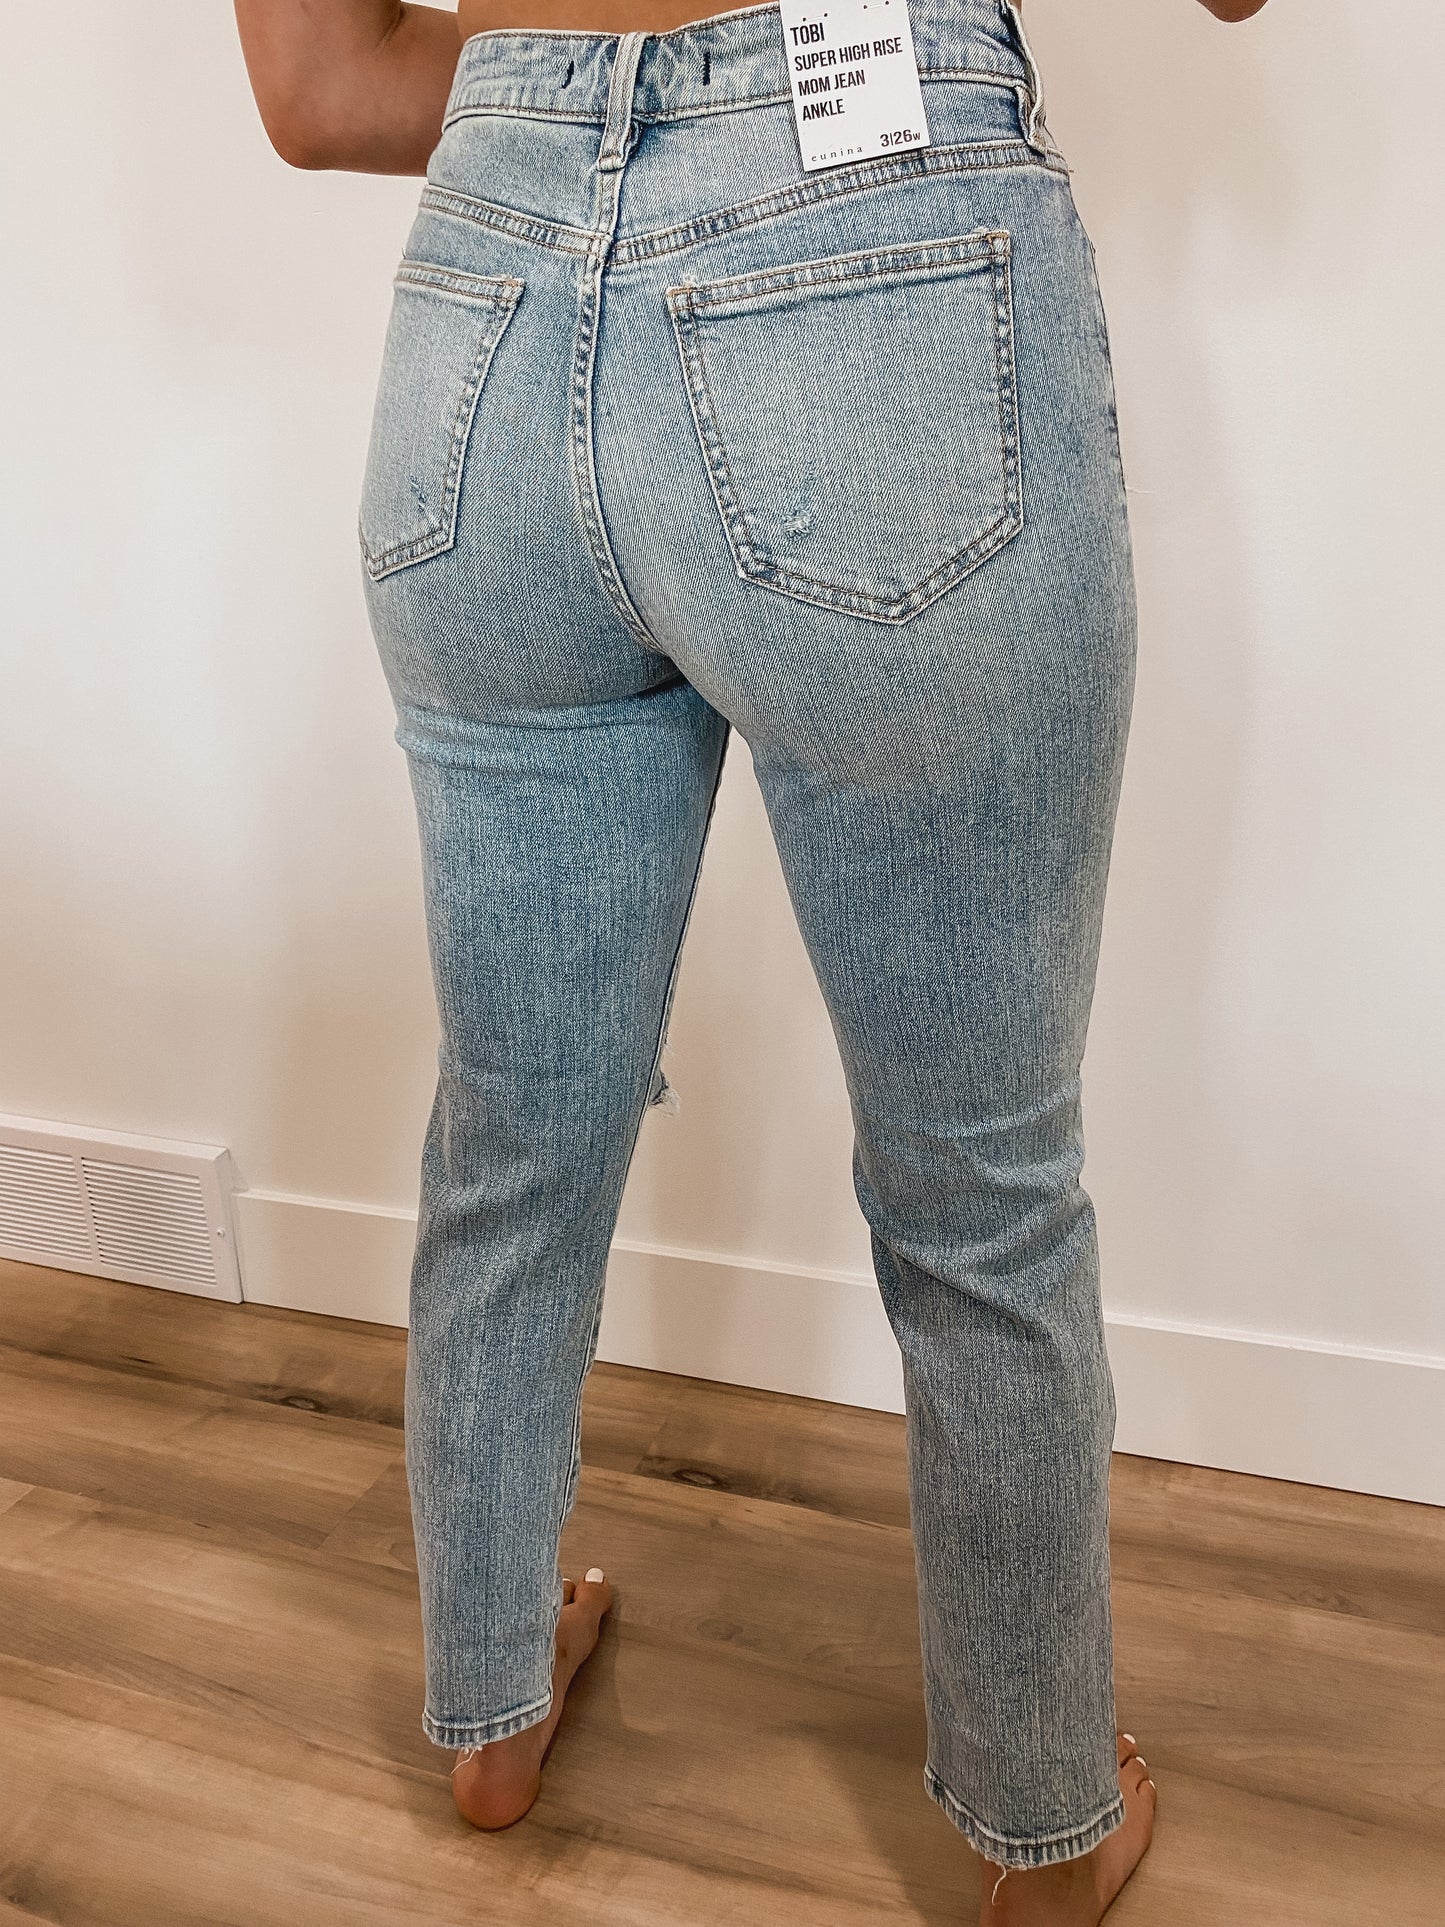 Super High Rise Mom Ankle Jean